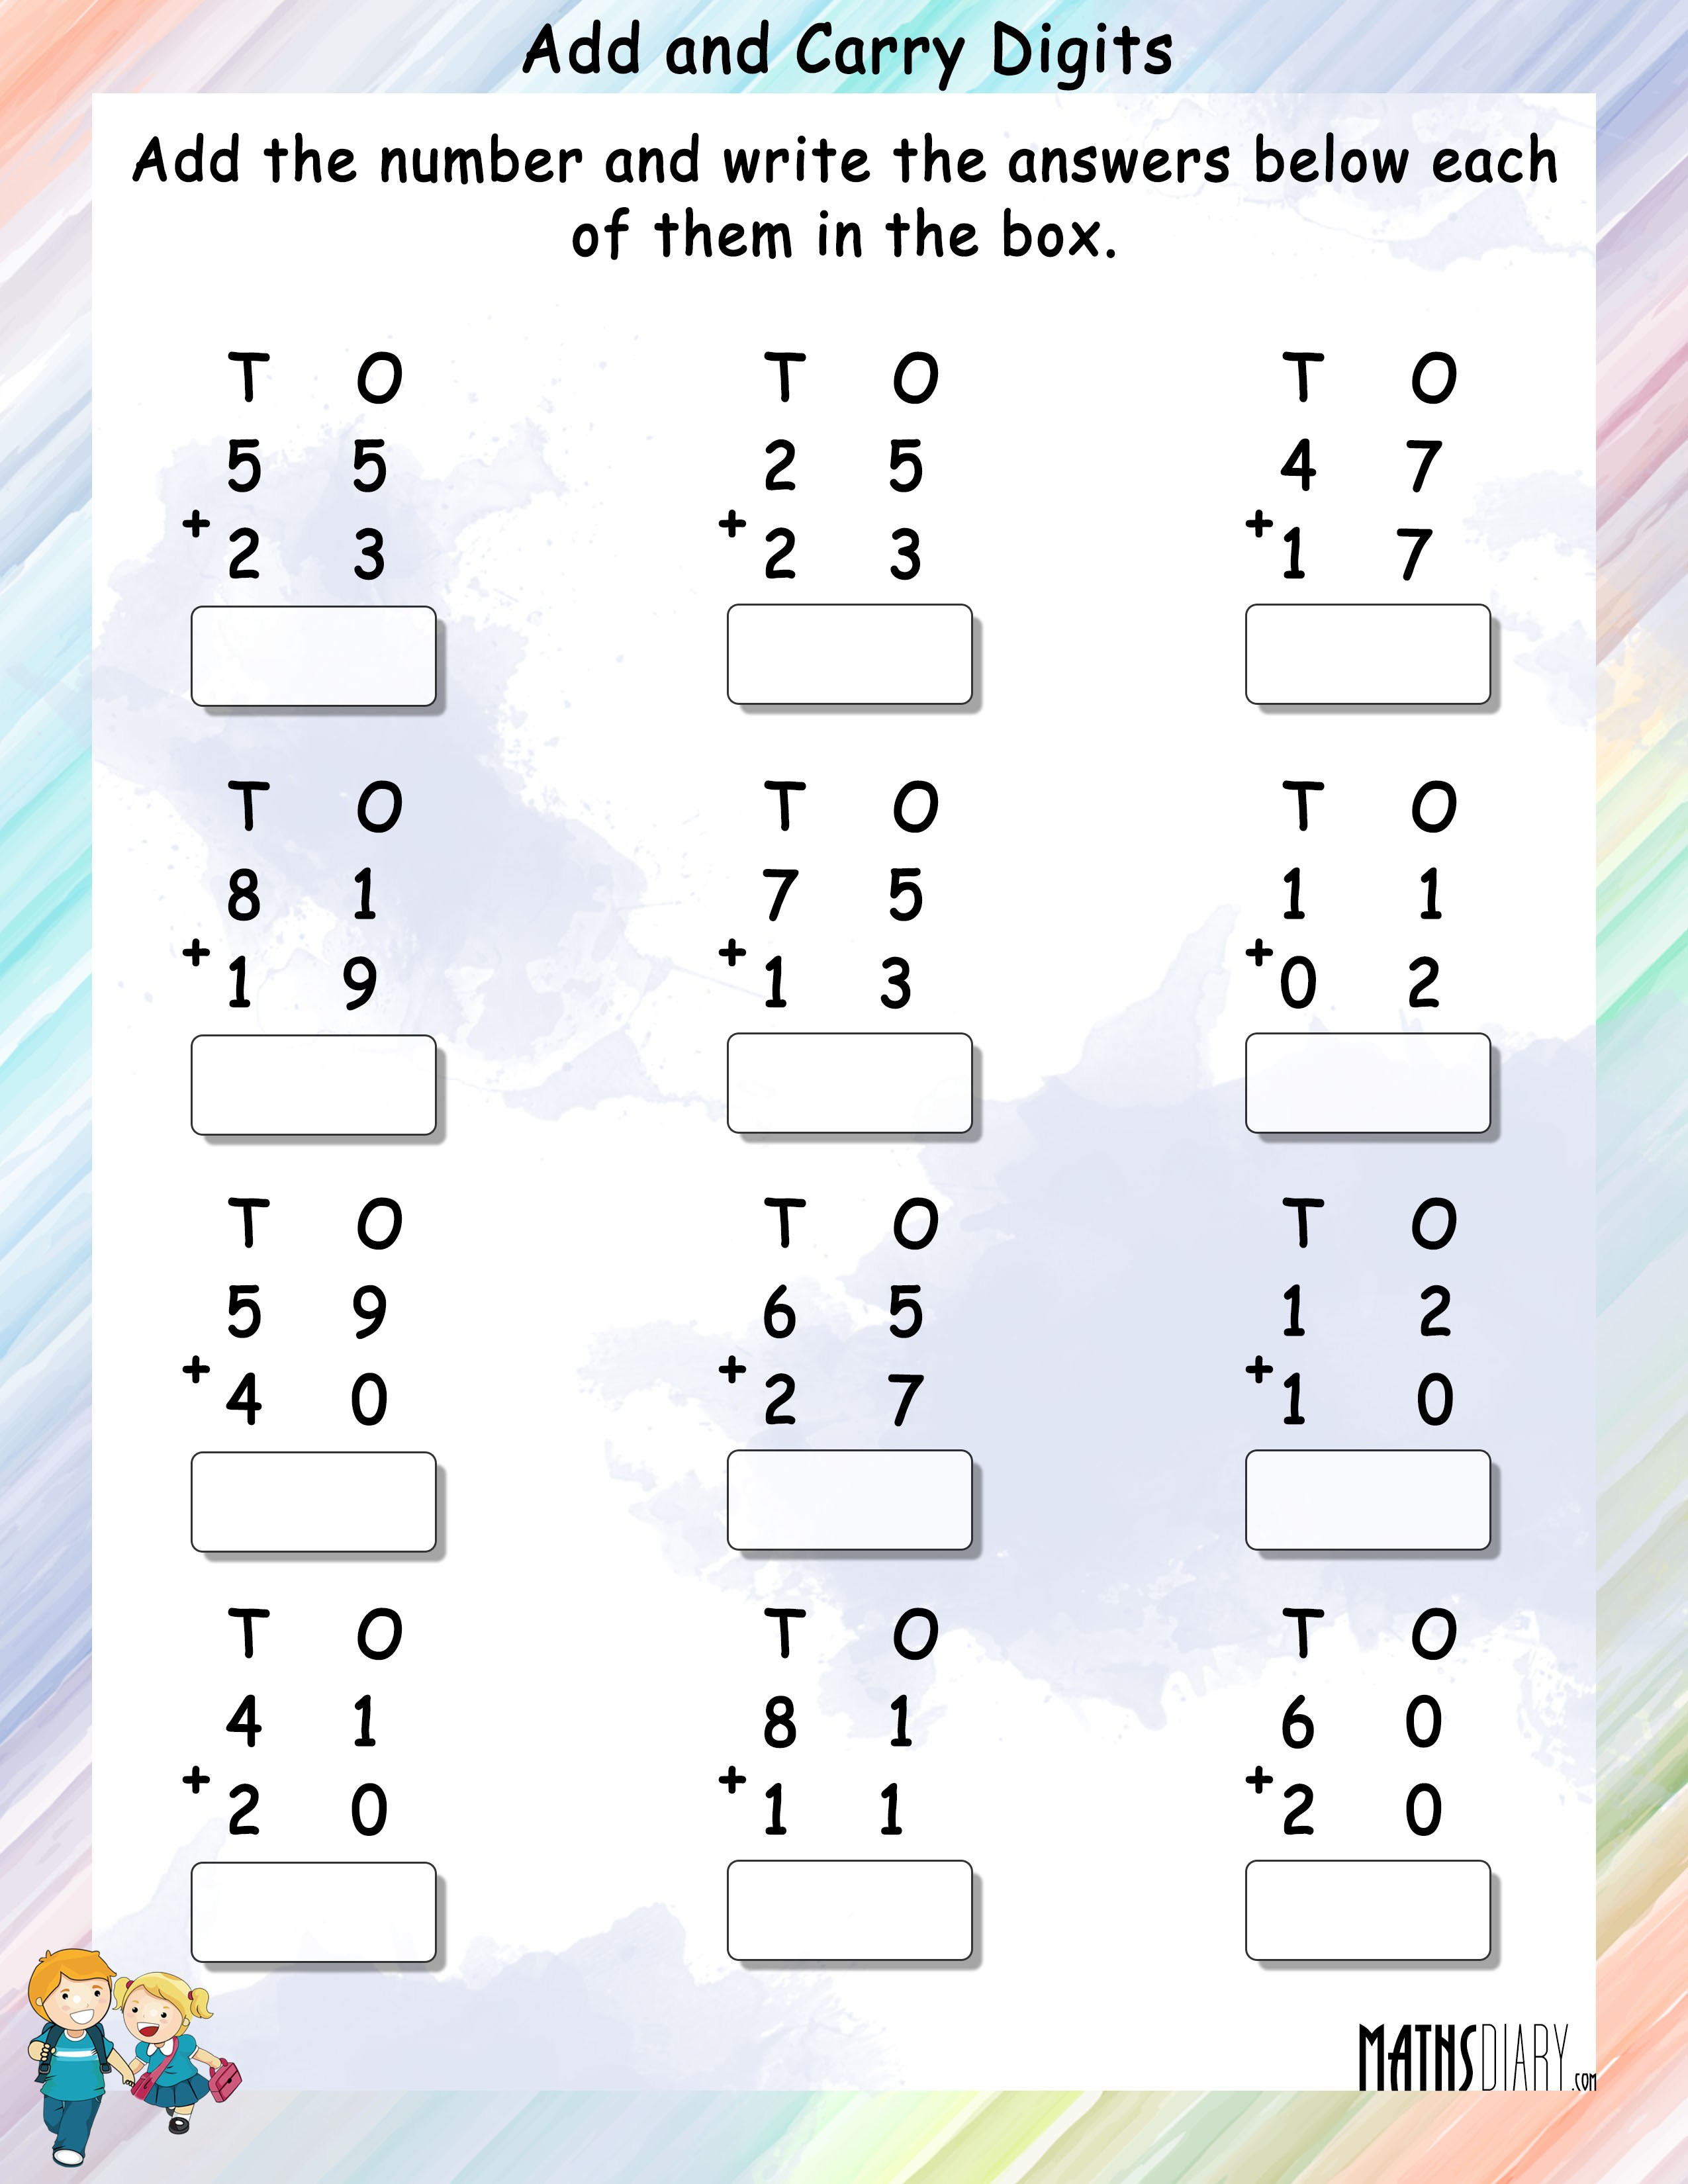 an-addition-worksheet-for-students-to-learn-how-to-count-the-numbers-in